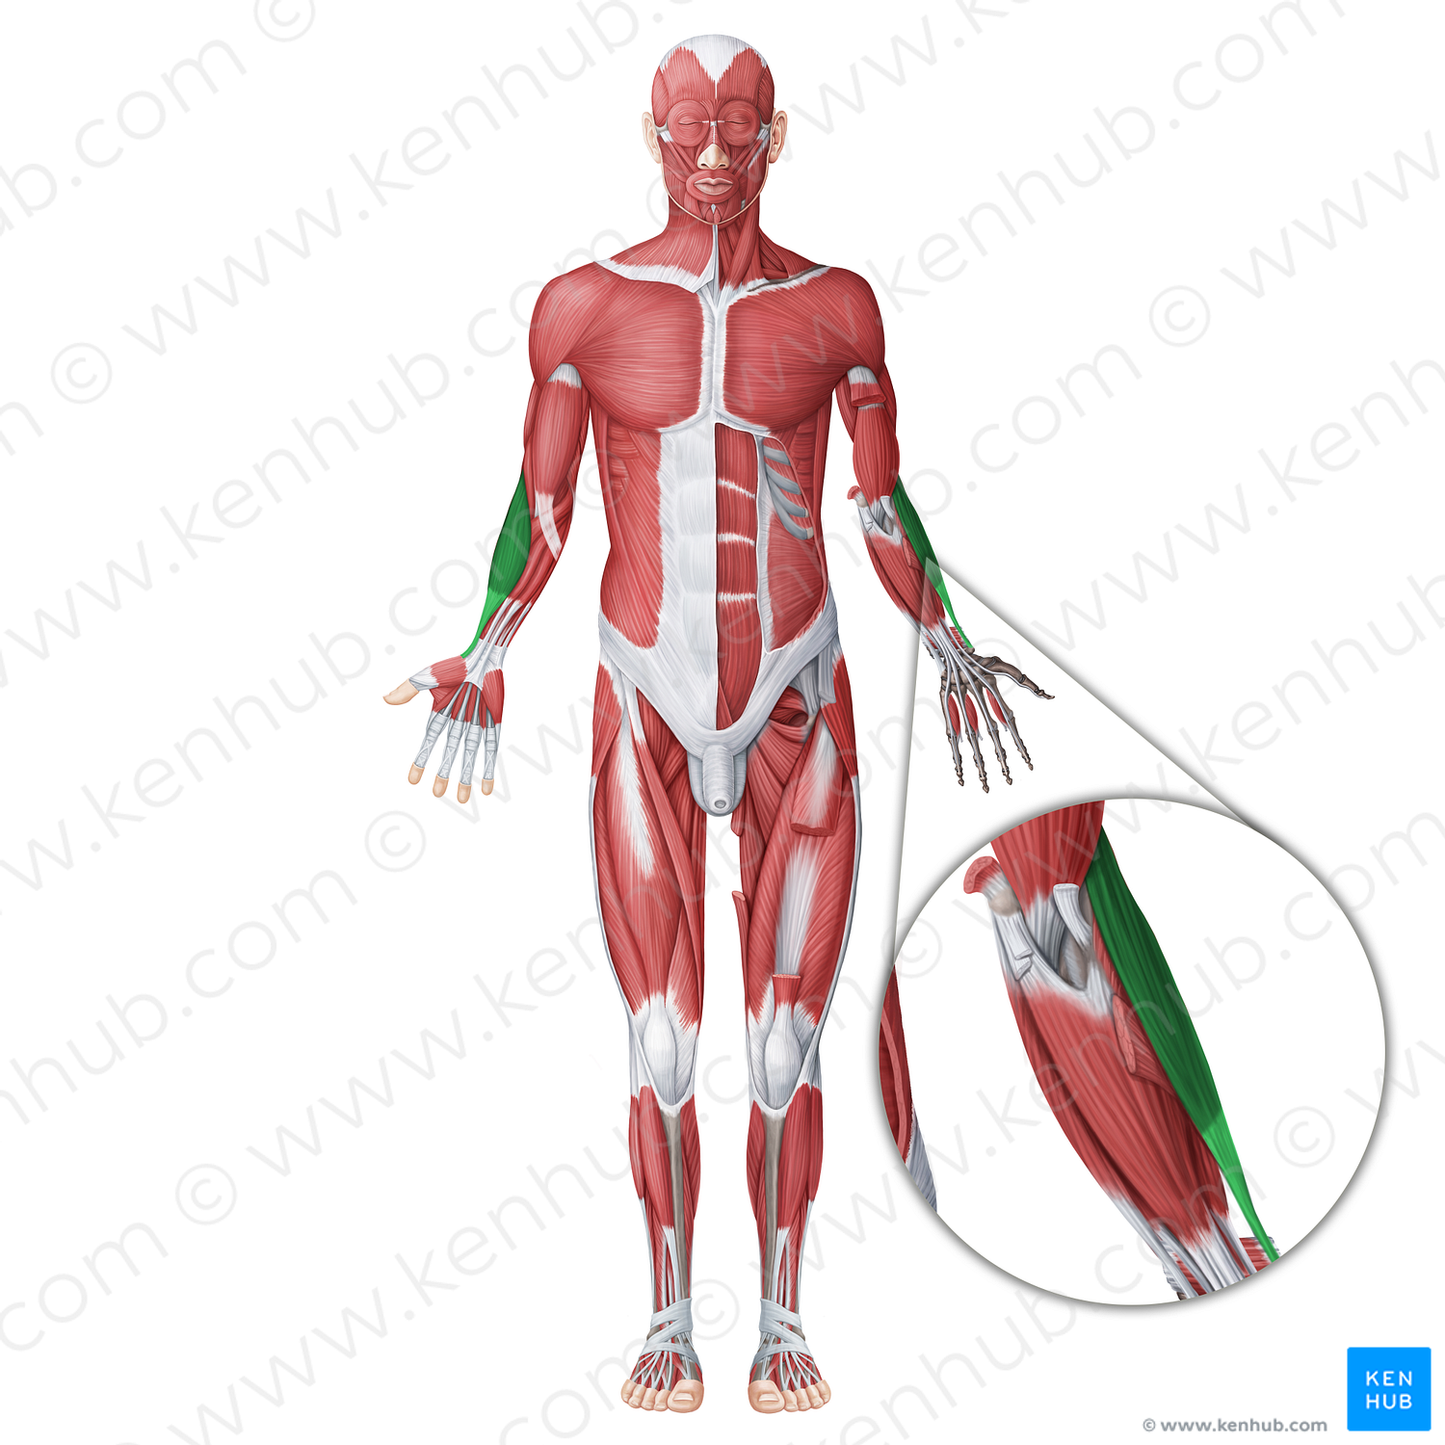 Posterior (extensor) muscles of forearm (#20054)